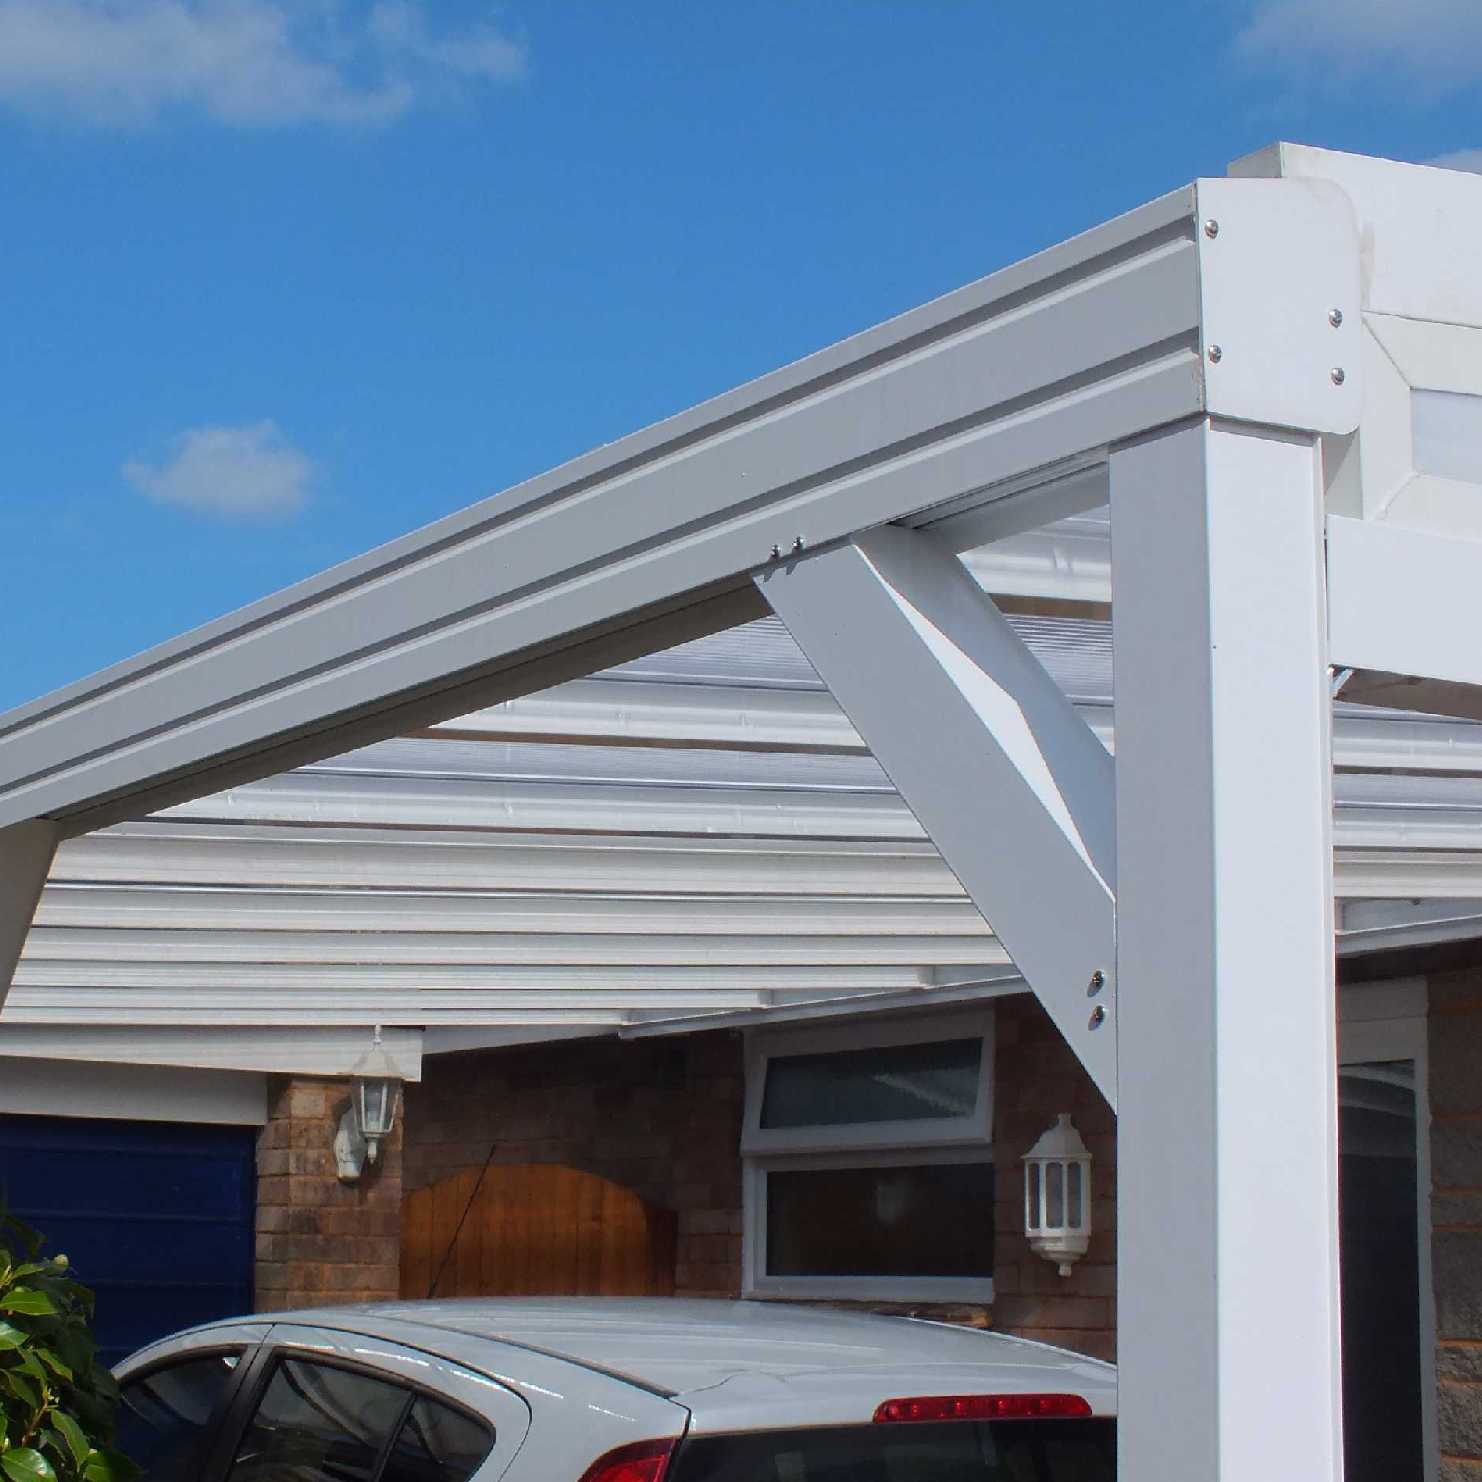 Buy Omega Smart Lean-To Canopy, White with 16mm Polycarbonate Glazing - 7.4m (W) x 1.5m (P), (4) Supporting Posts online today